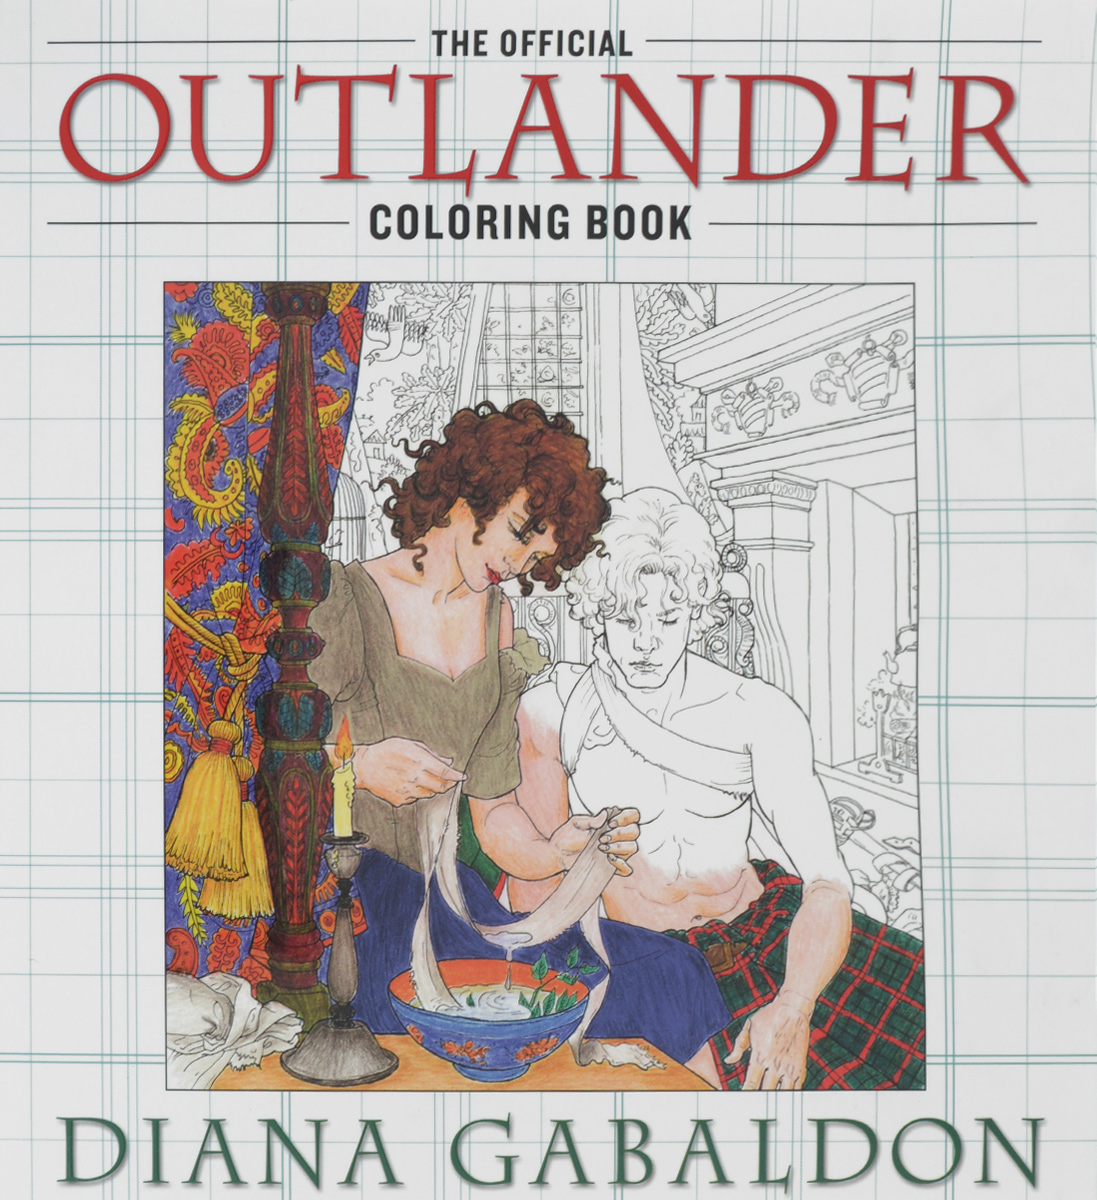 The Official Outlander: Coloring Book